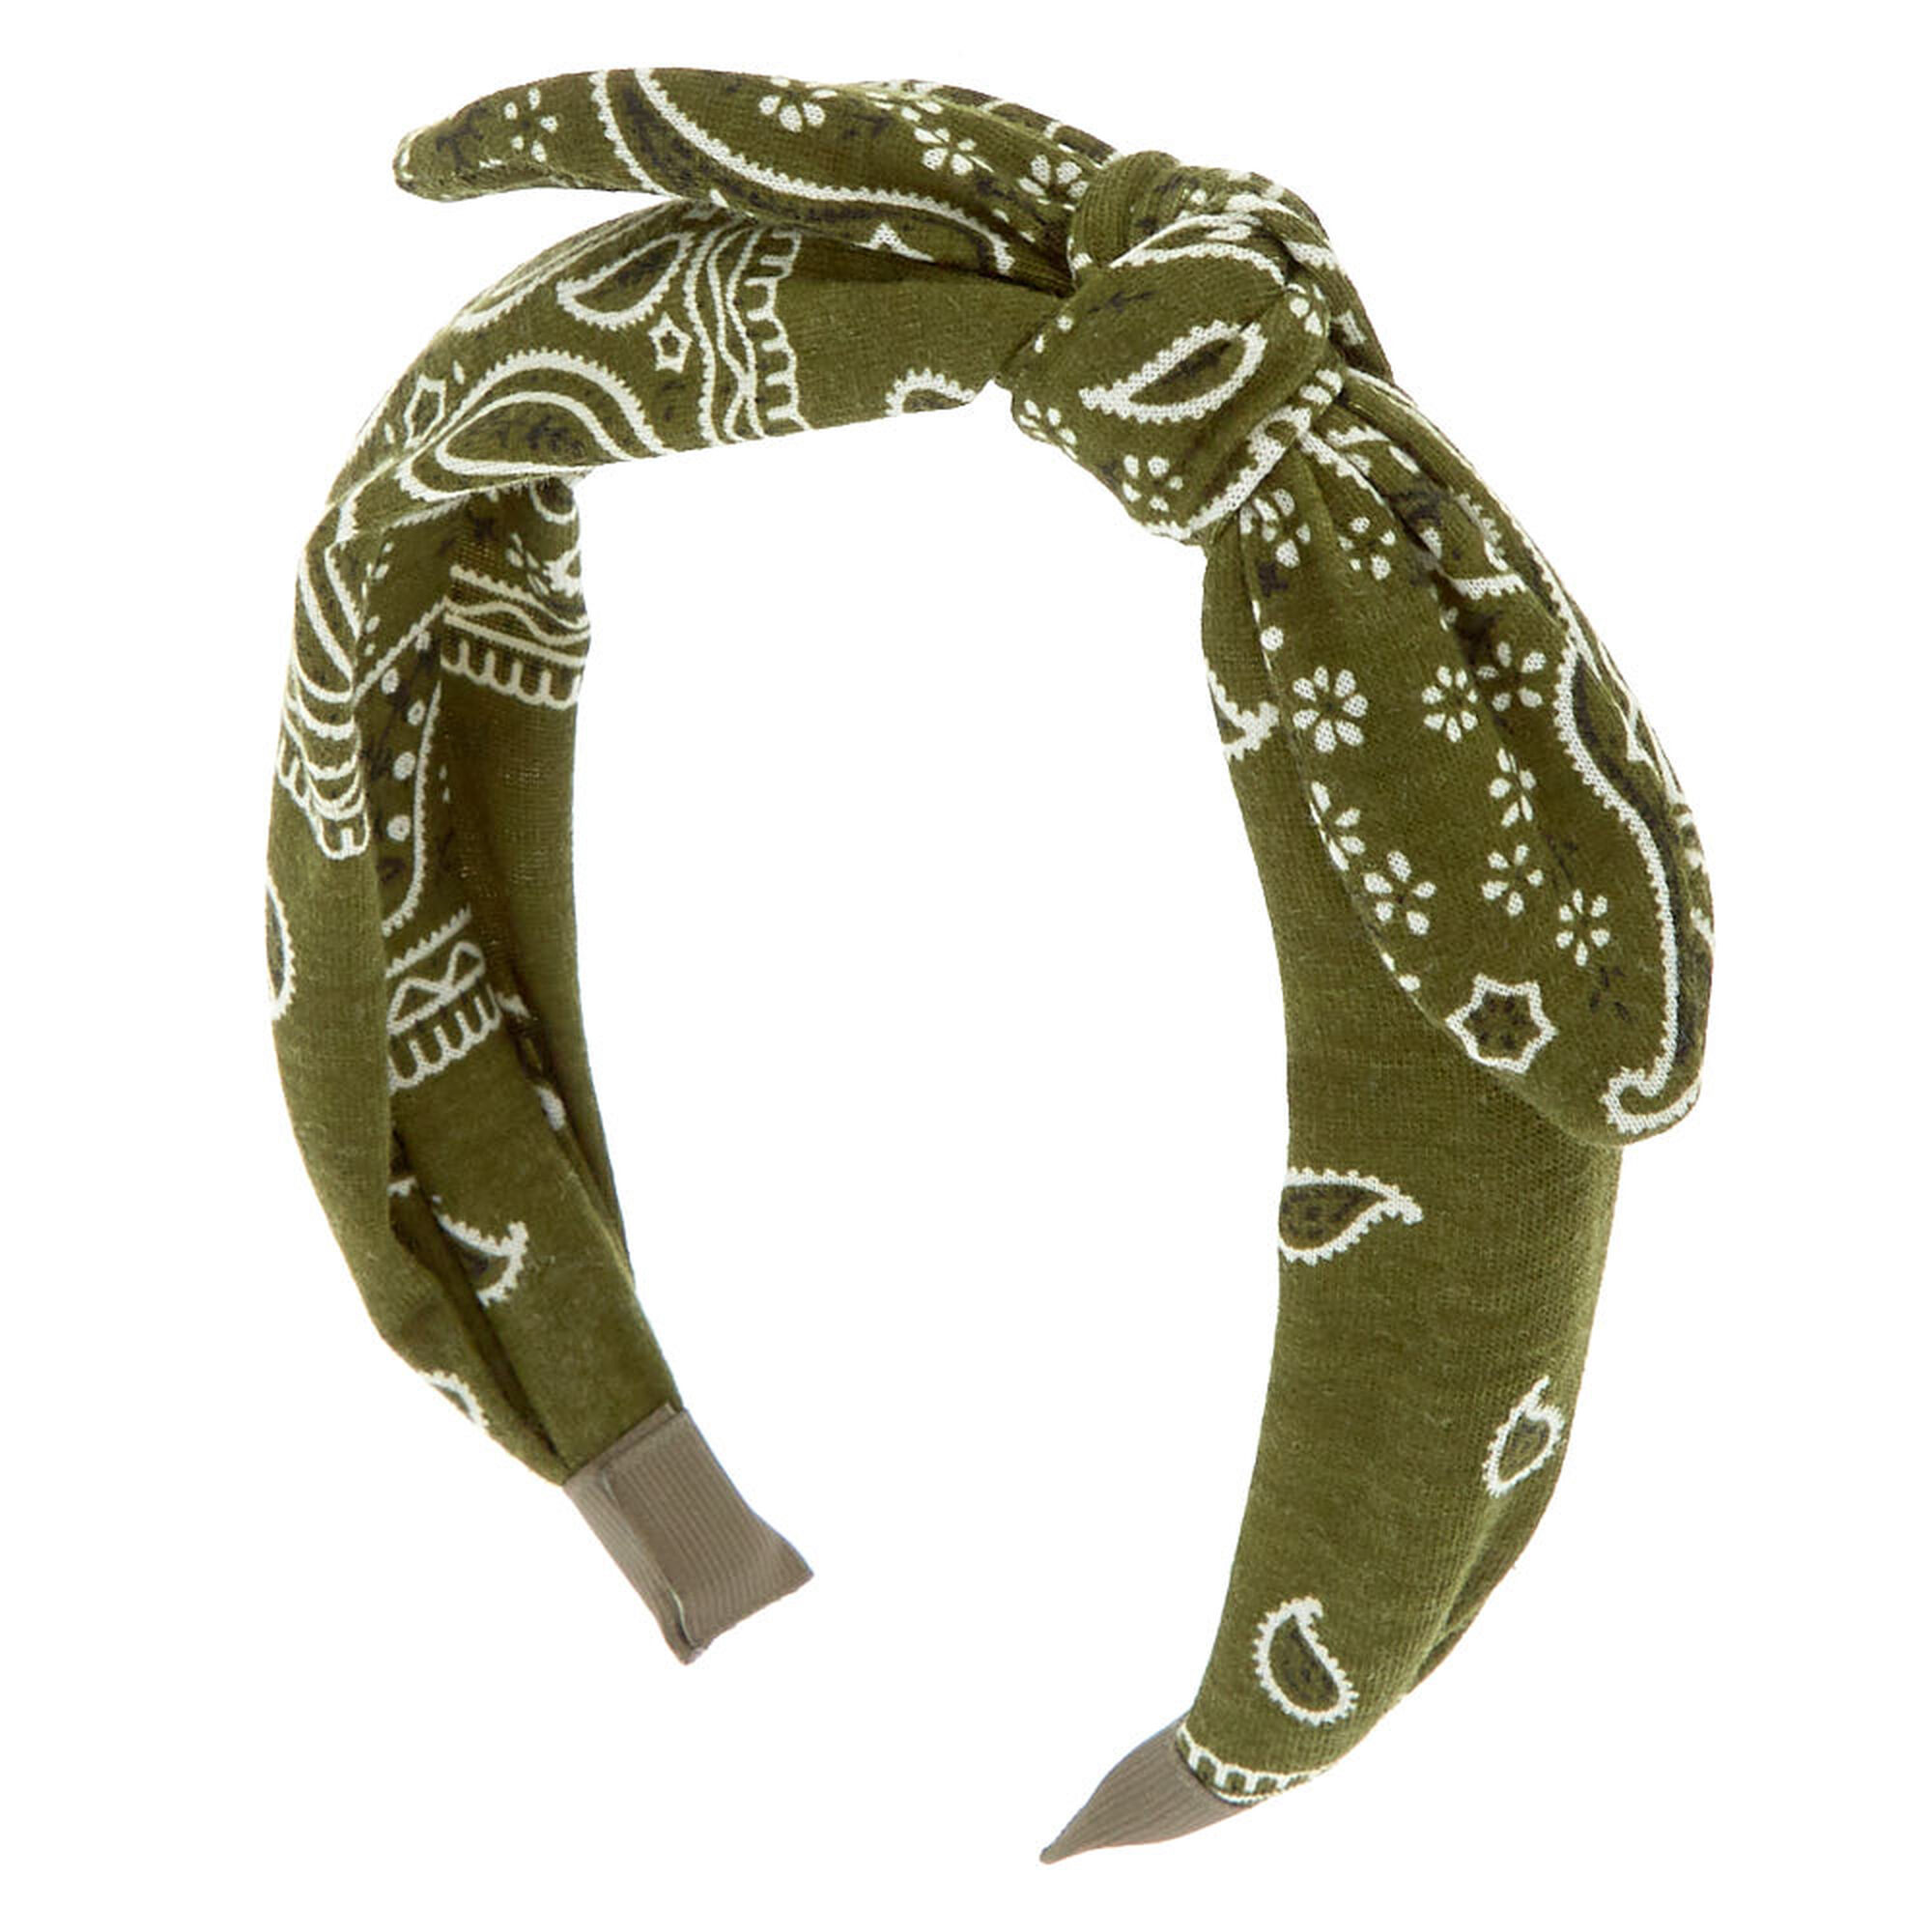 View Claires Bandana Knotted Bow Headband Olive Green information